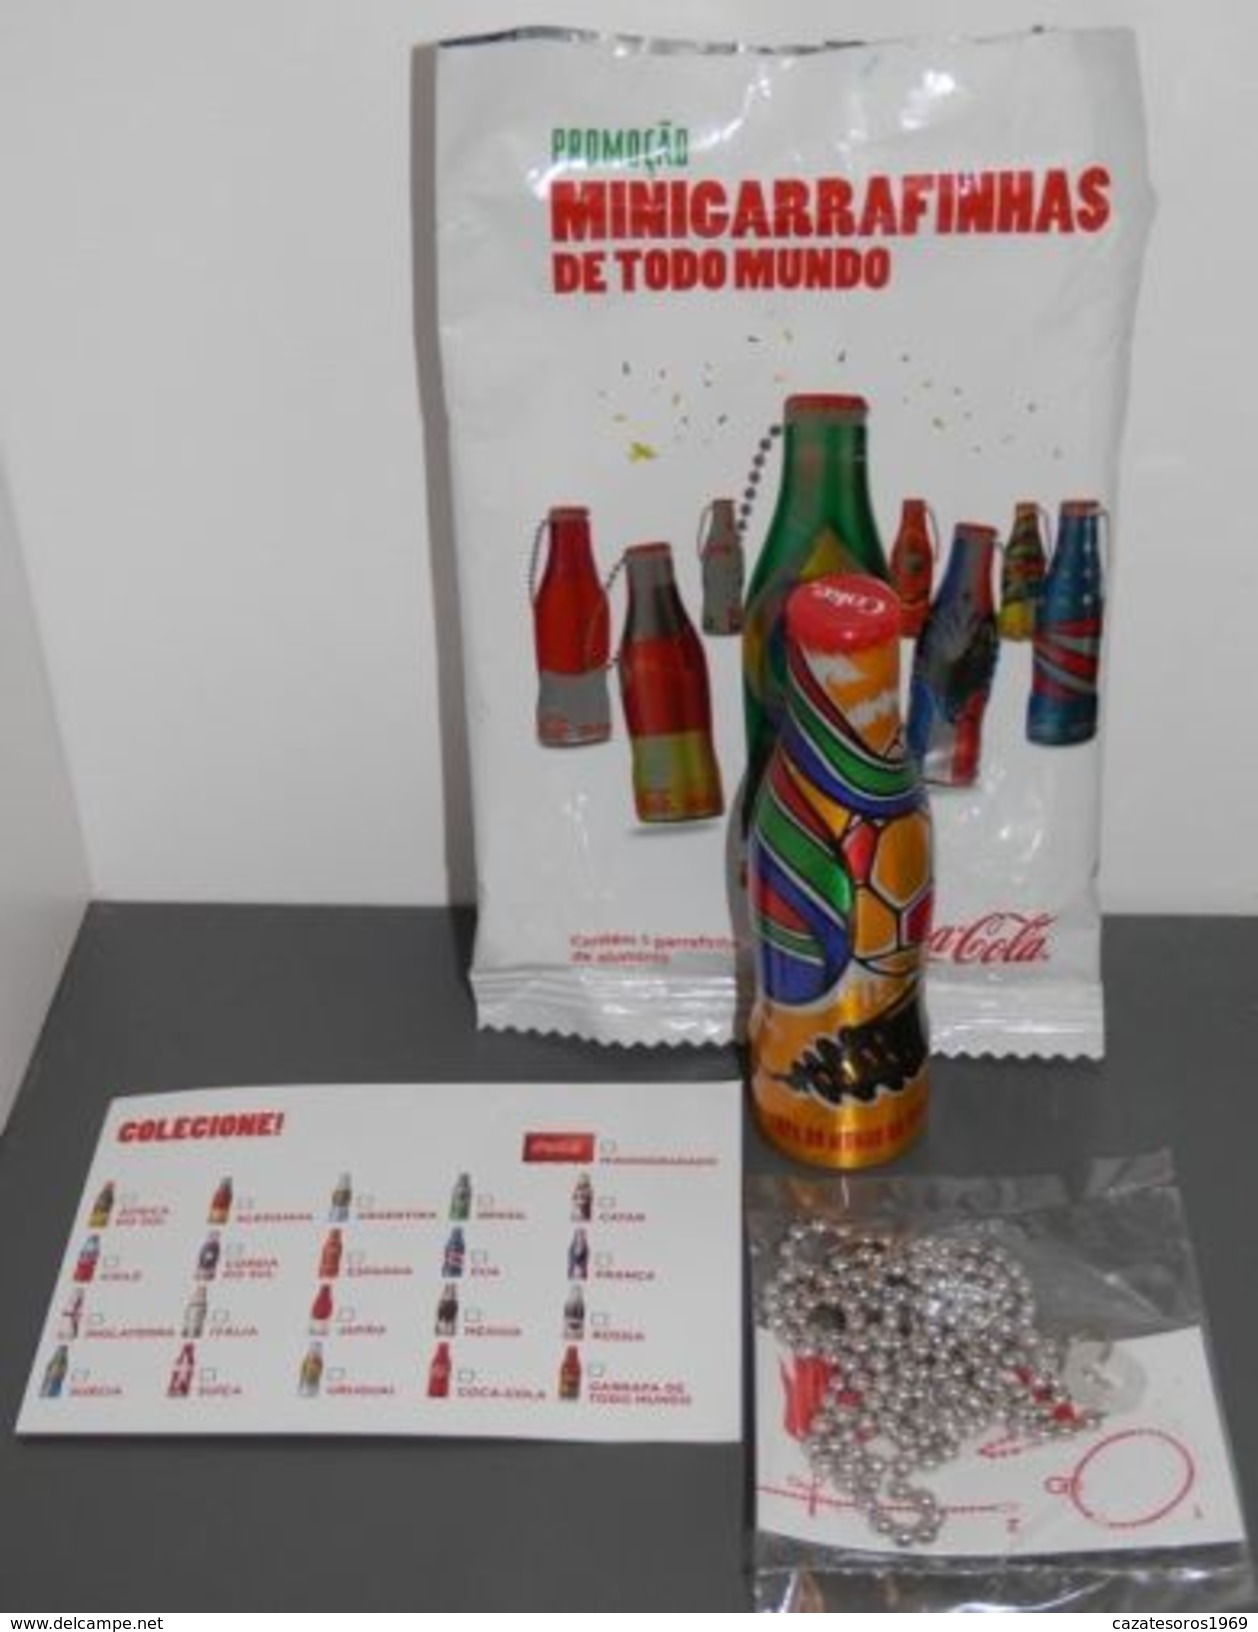 COCA-COLA  MINI BOUTEILLE   FIFA WORDL CUP  BRAZIL 2014 ( SOUTH AFRICA ) - Soda